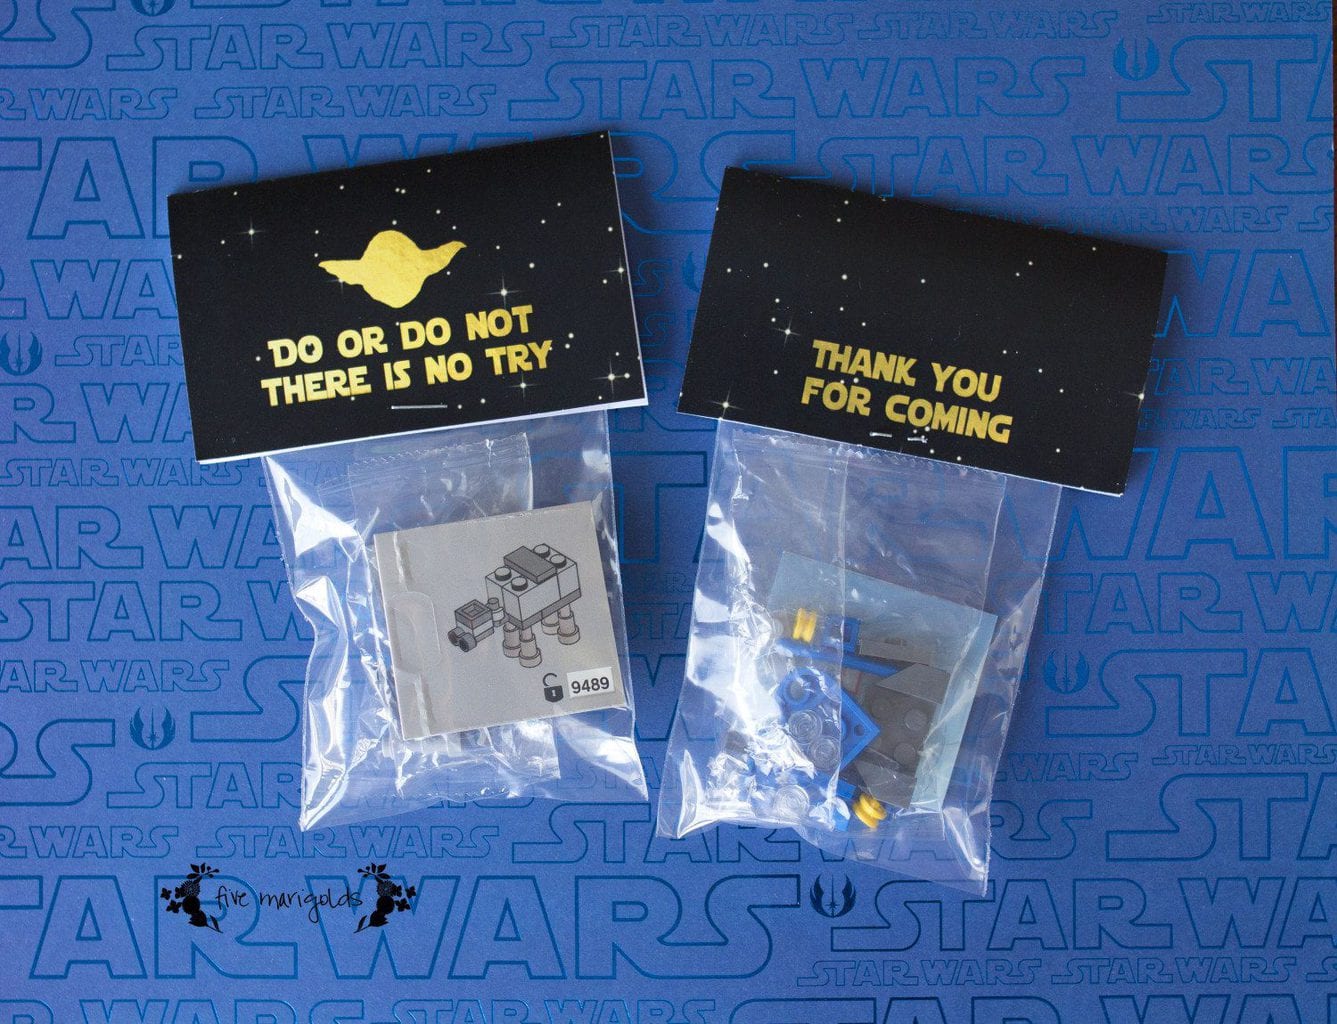 Star Wars Lego Advent Calencar Birthday Party Favors with Printable Tags| www.fivemarigolds.com